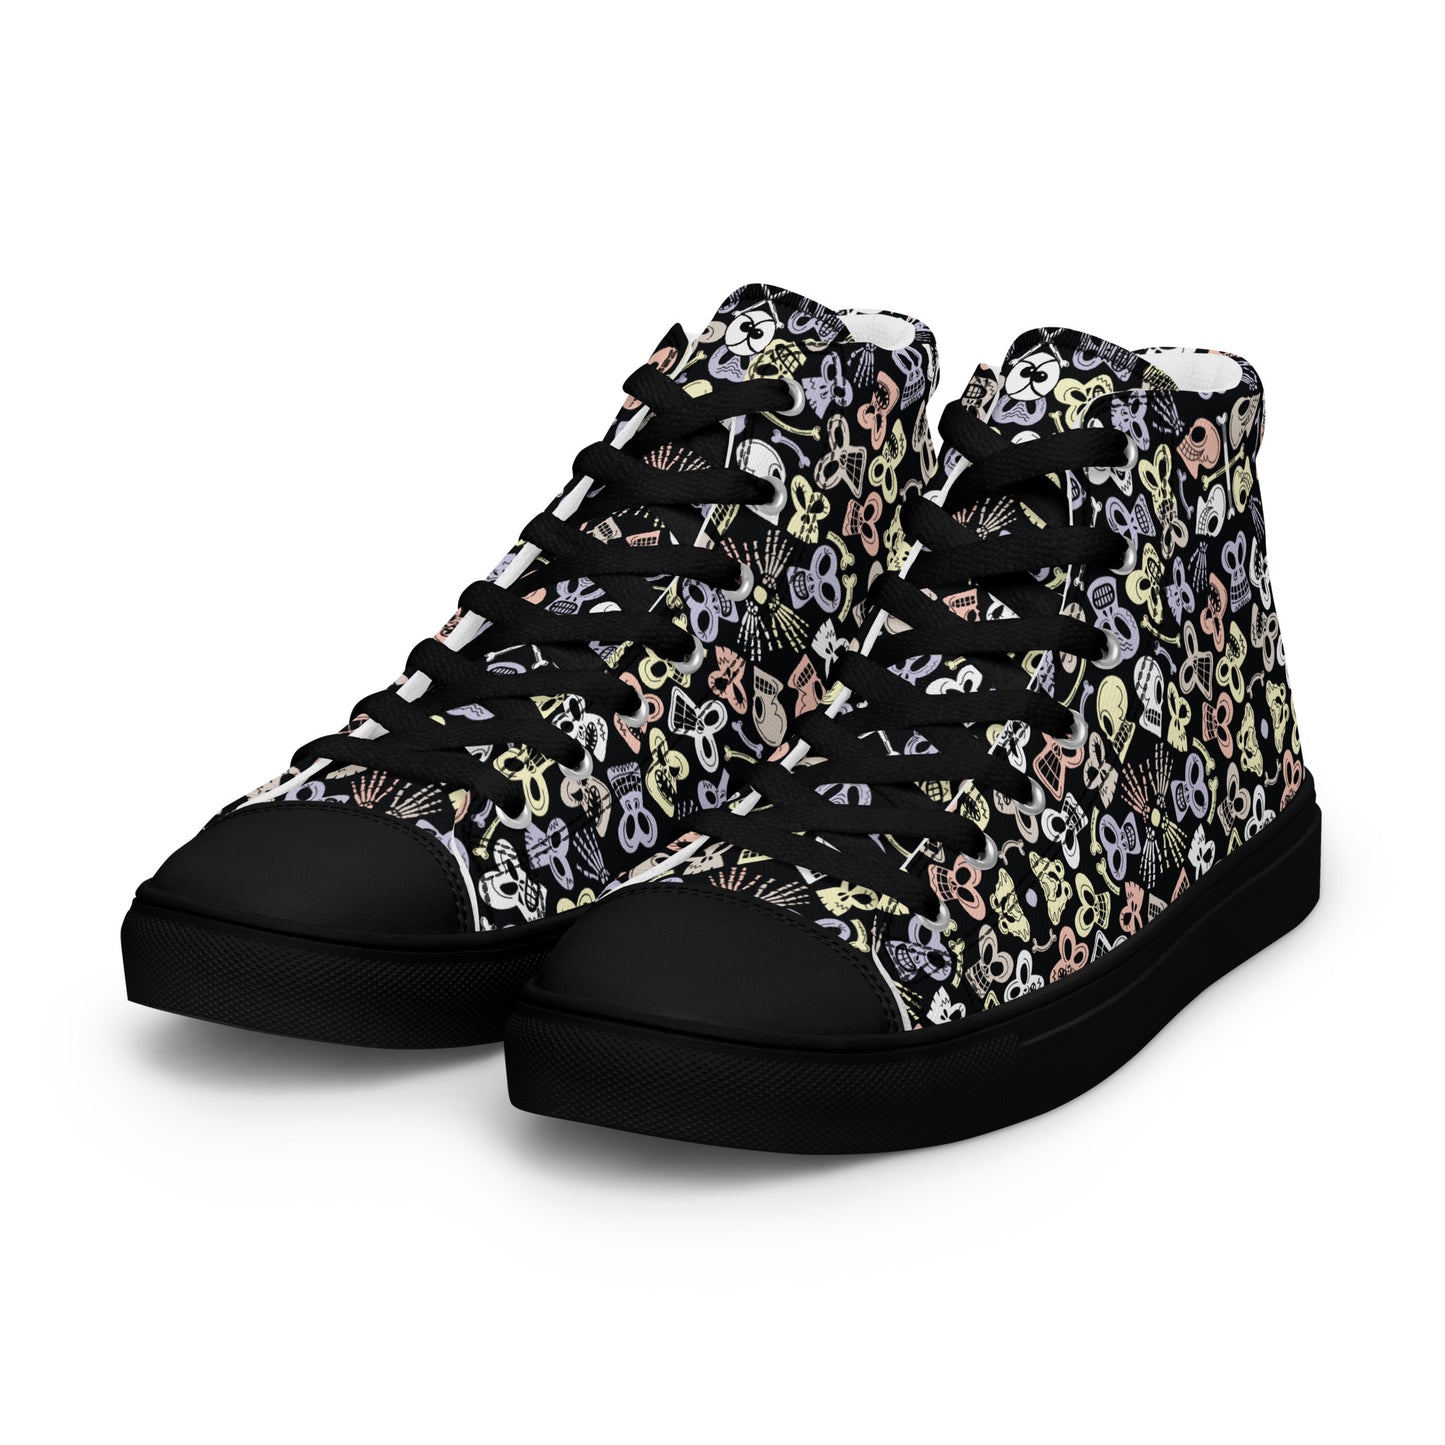 Bewitched Skulls: Hauntingly Chic Pattern Design - Men’s high top canvas shoes. Black color. Overview